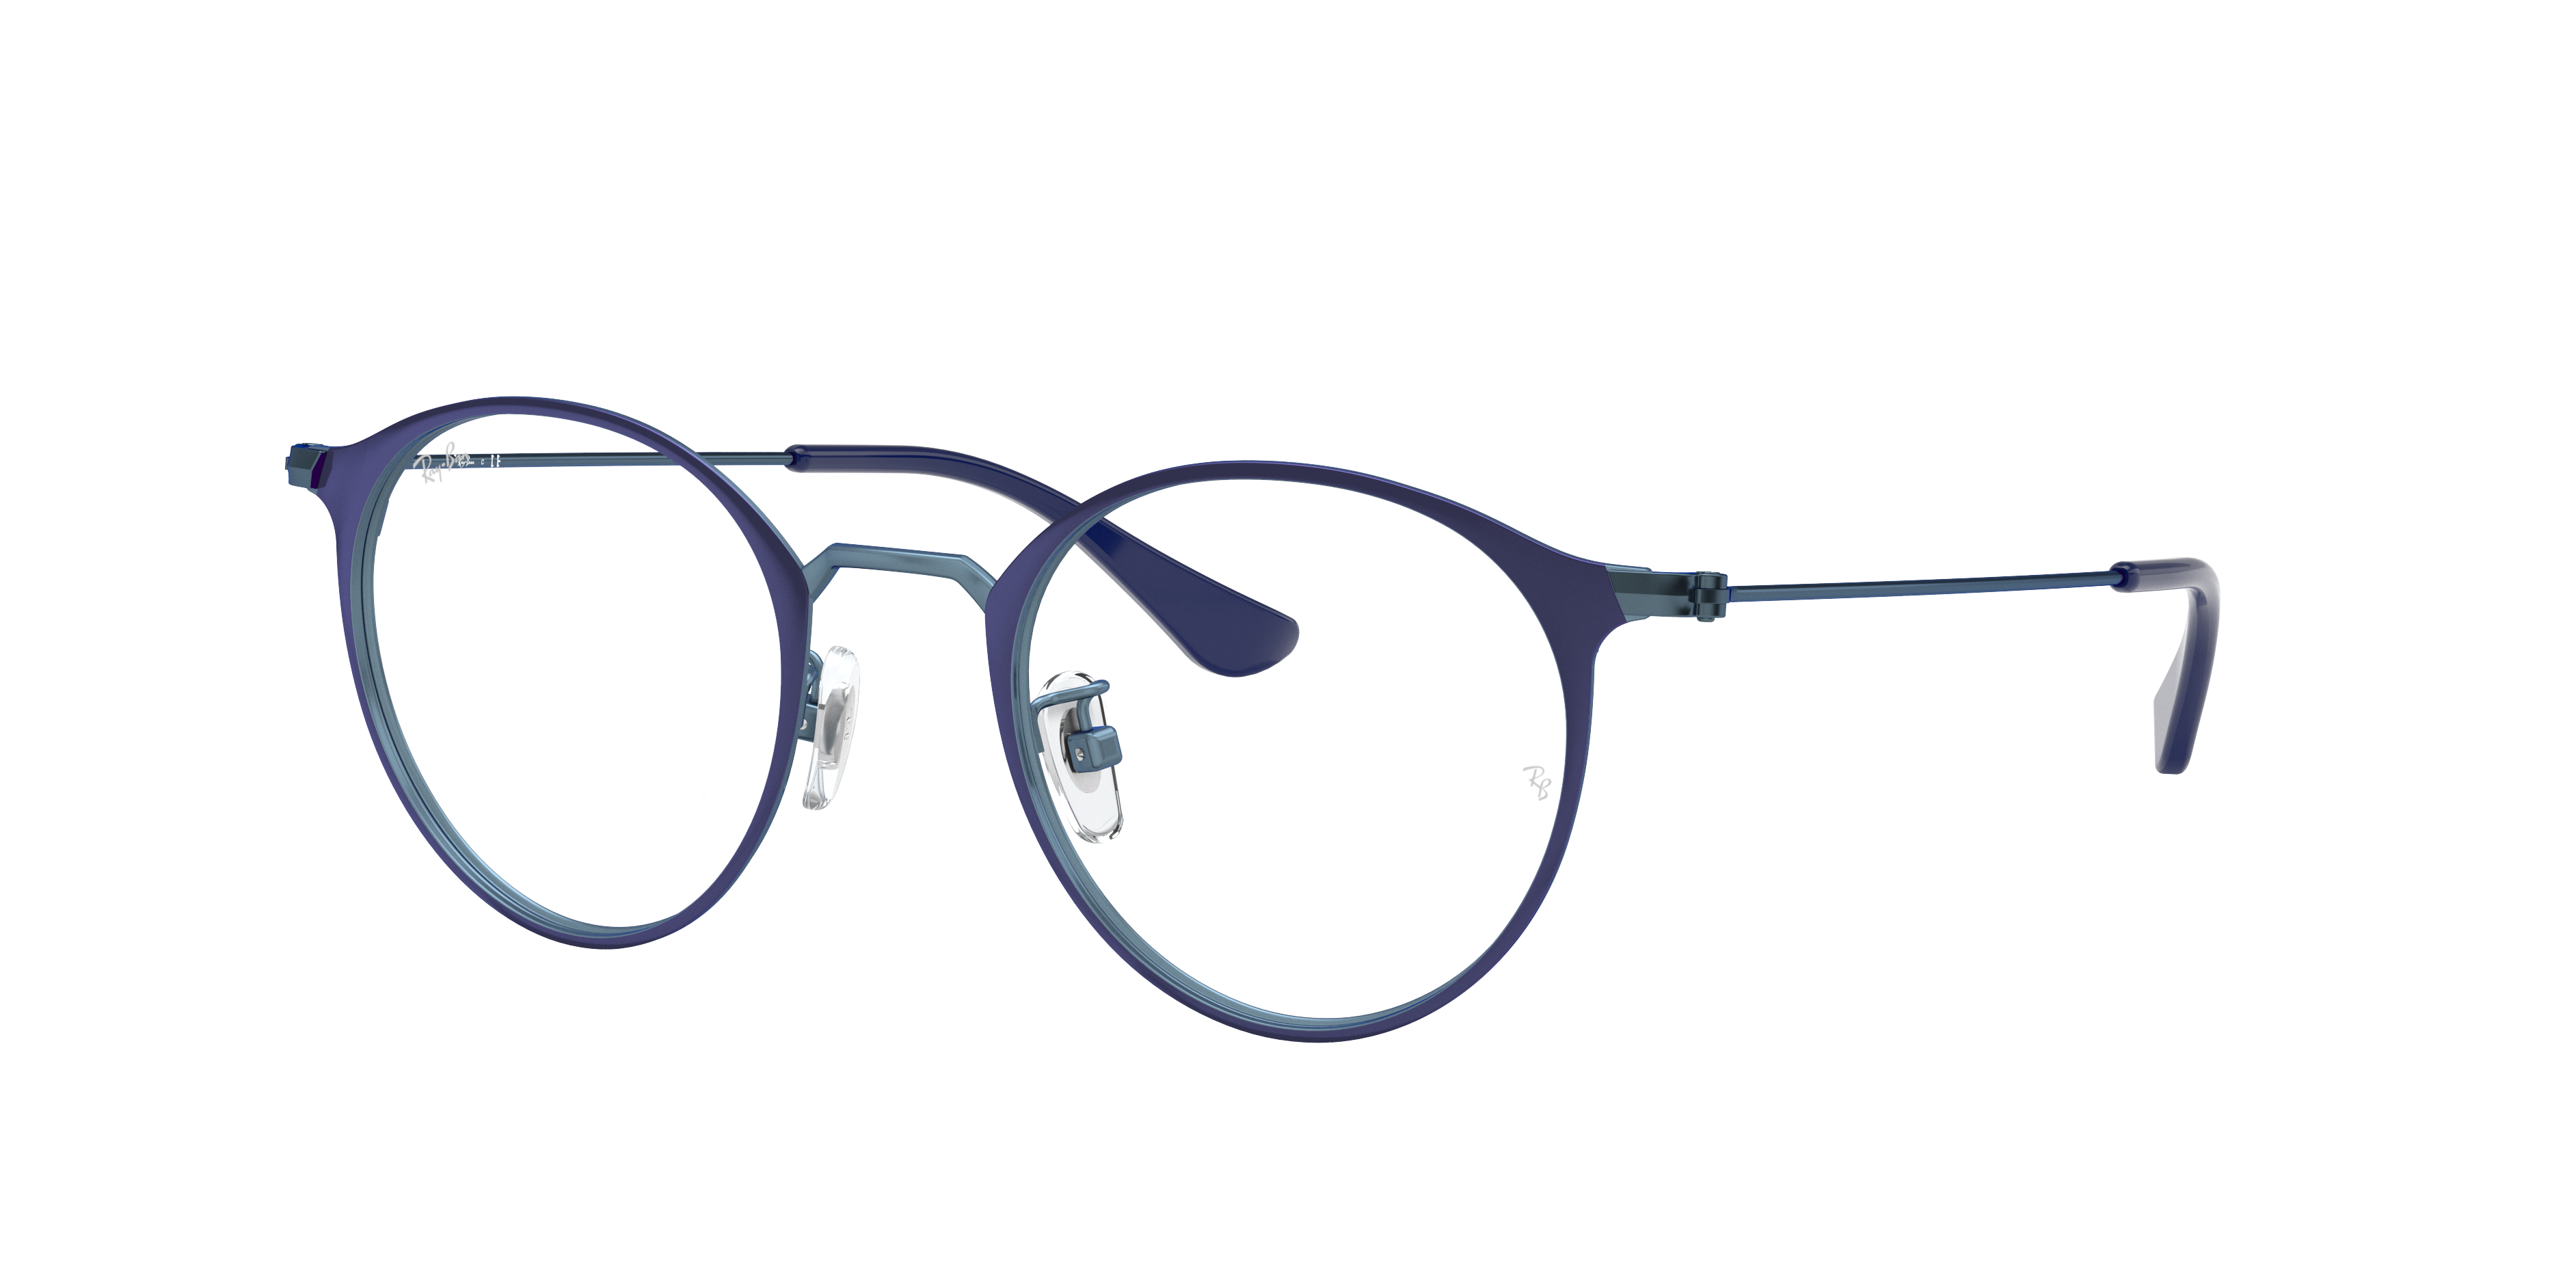 Rb6378 Eyeglasses with Blue Frame - RB6378F | Ray-Ban®